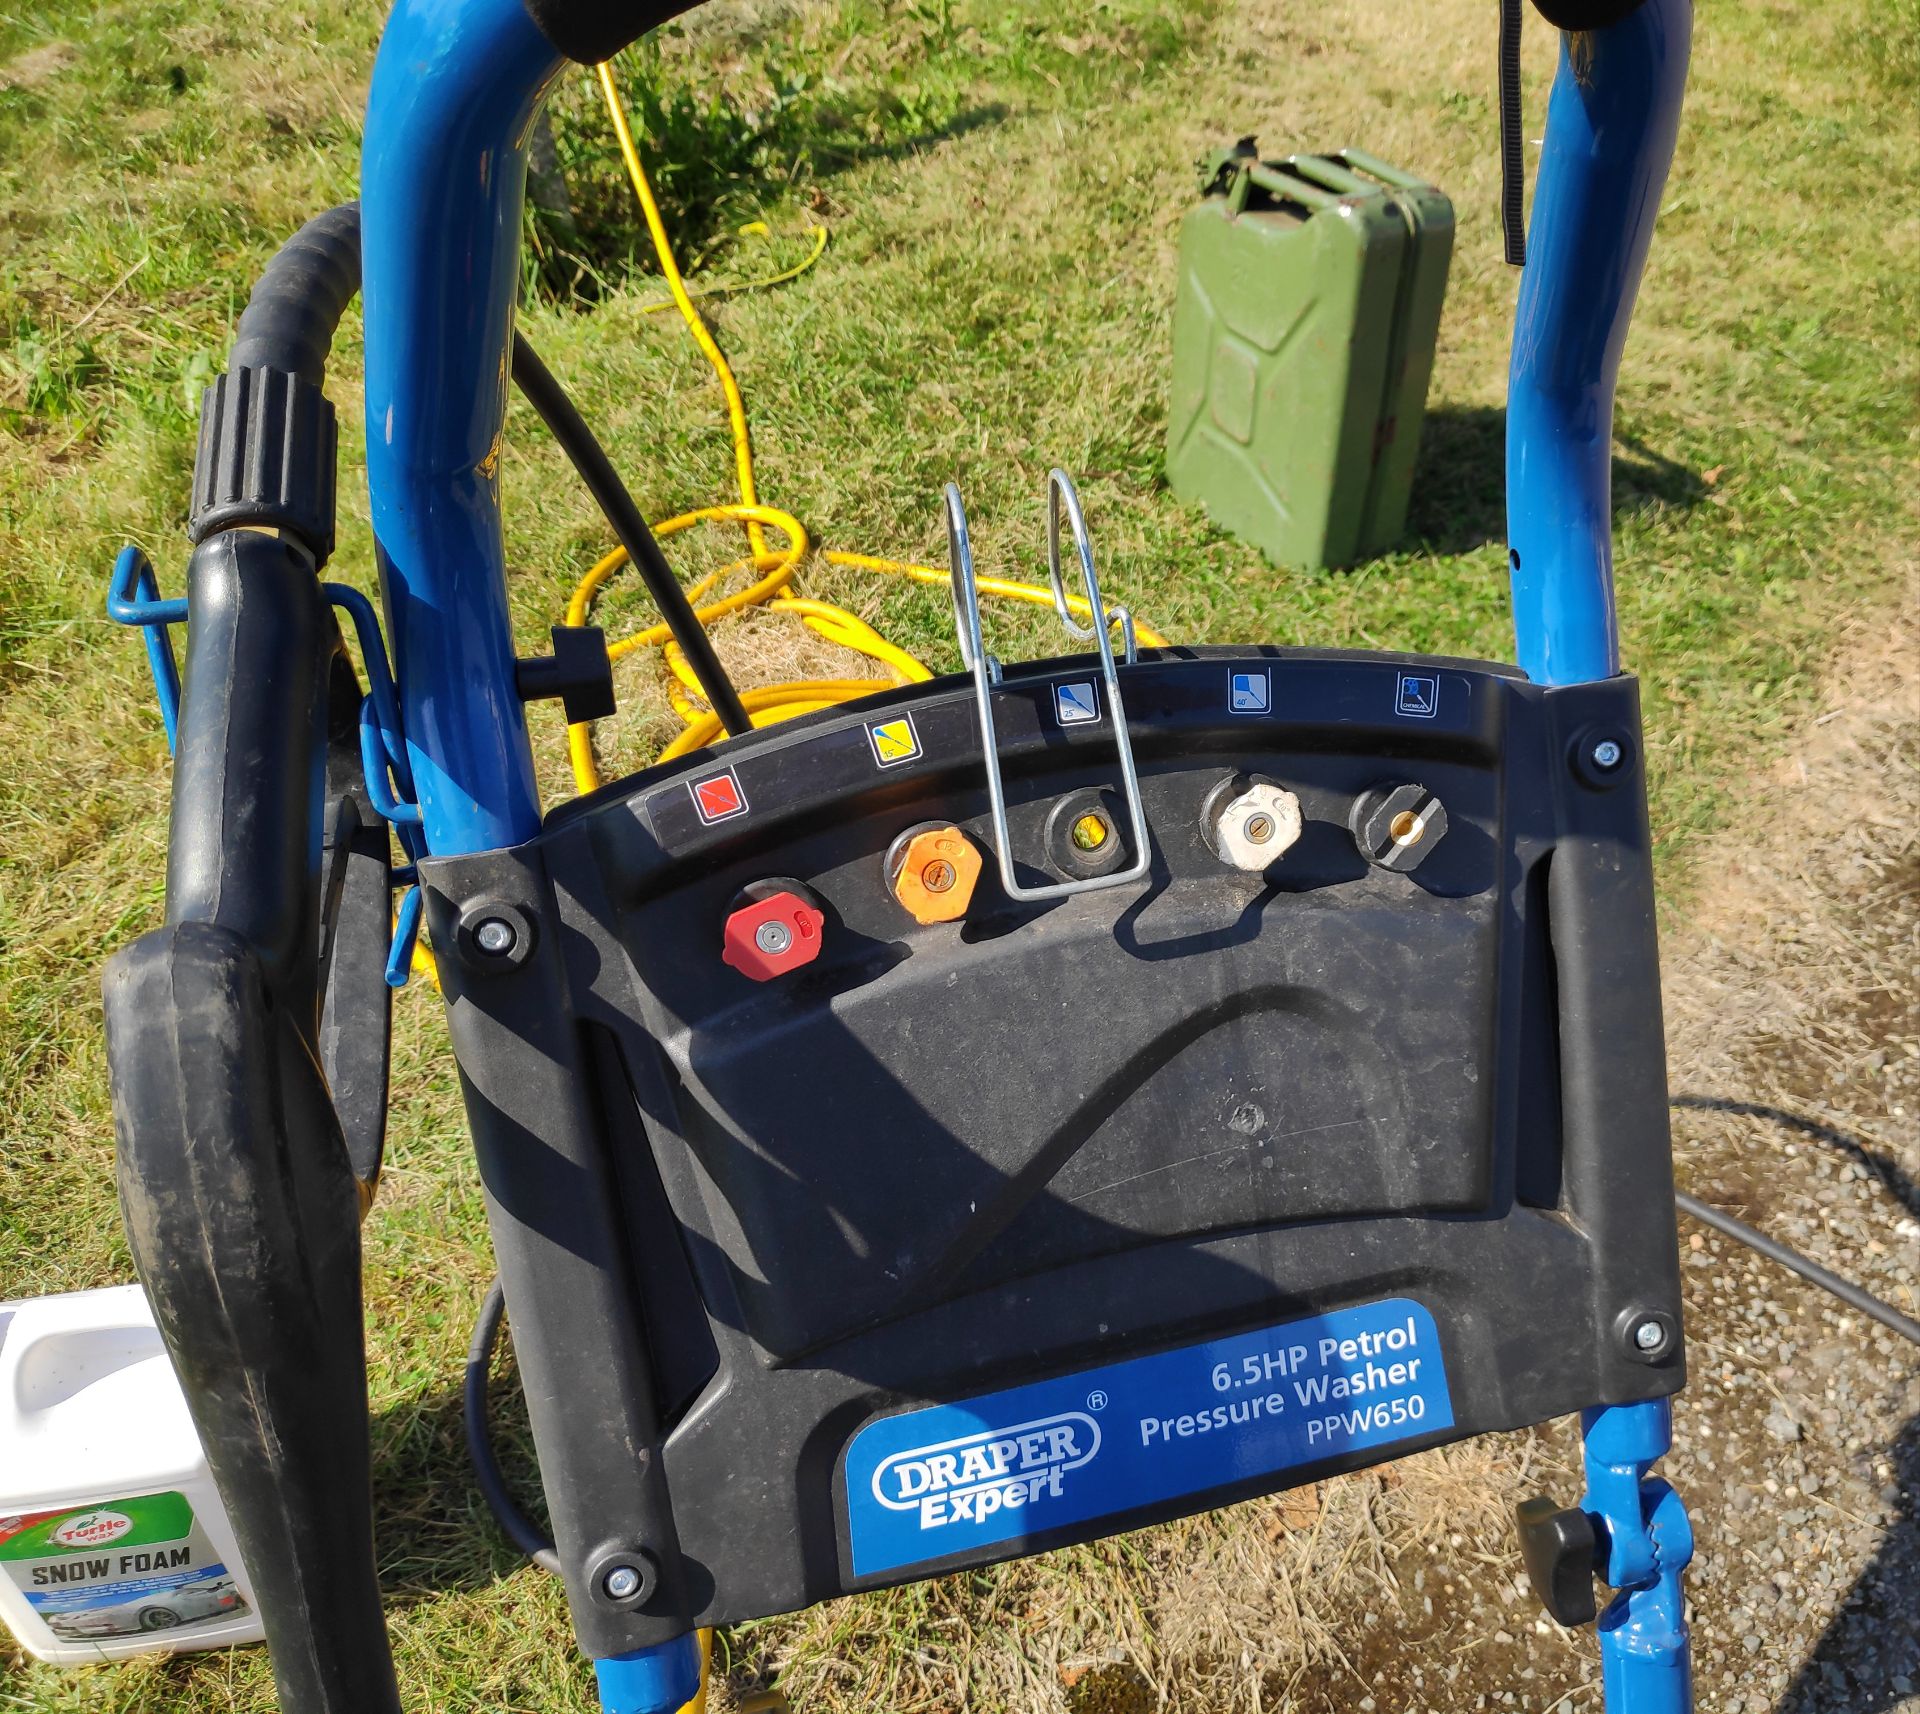 1 x Draper Expert 6.5Hp Petrol Pressure Washer PPW650 - CL011 - Location: Corby, Northamptonshire - Image 10 of 10